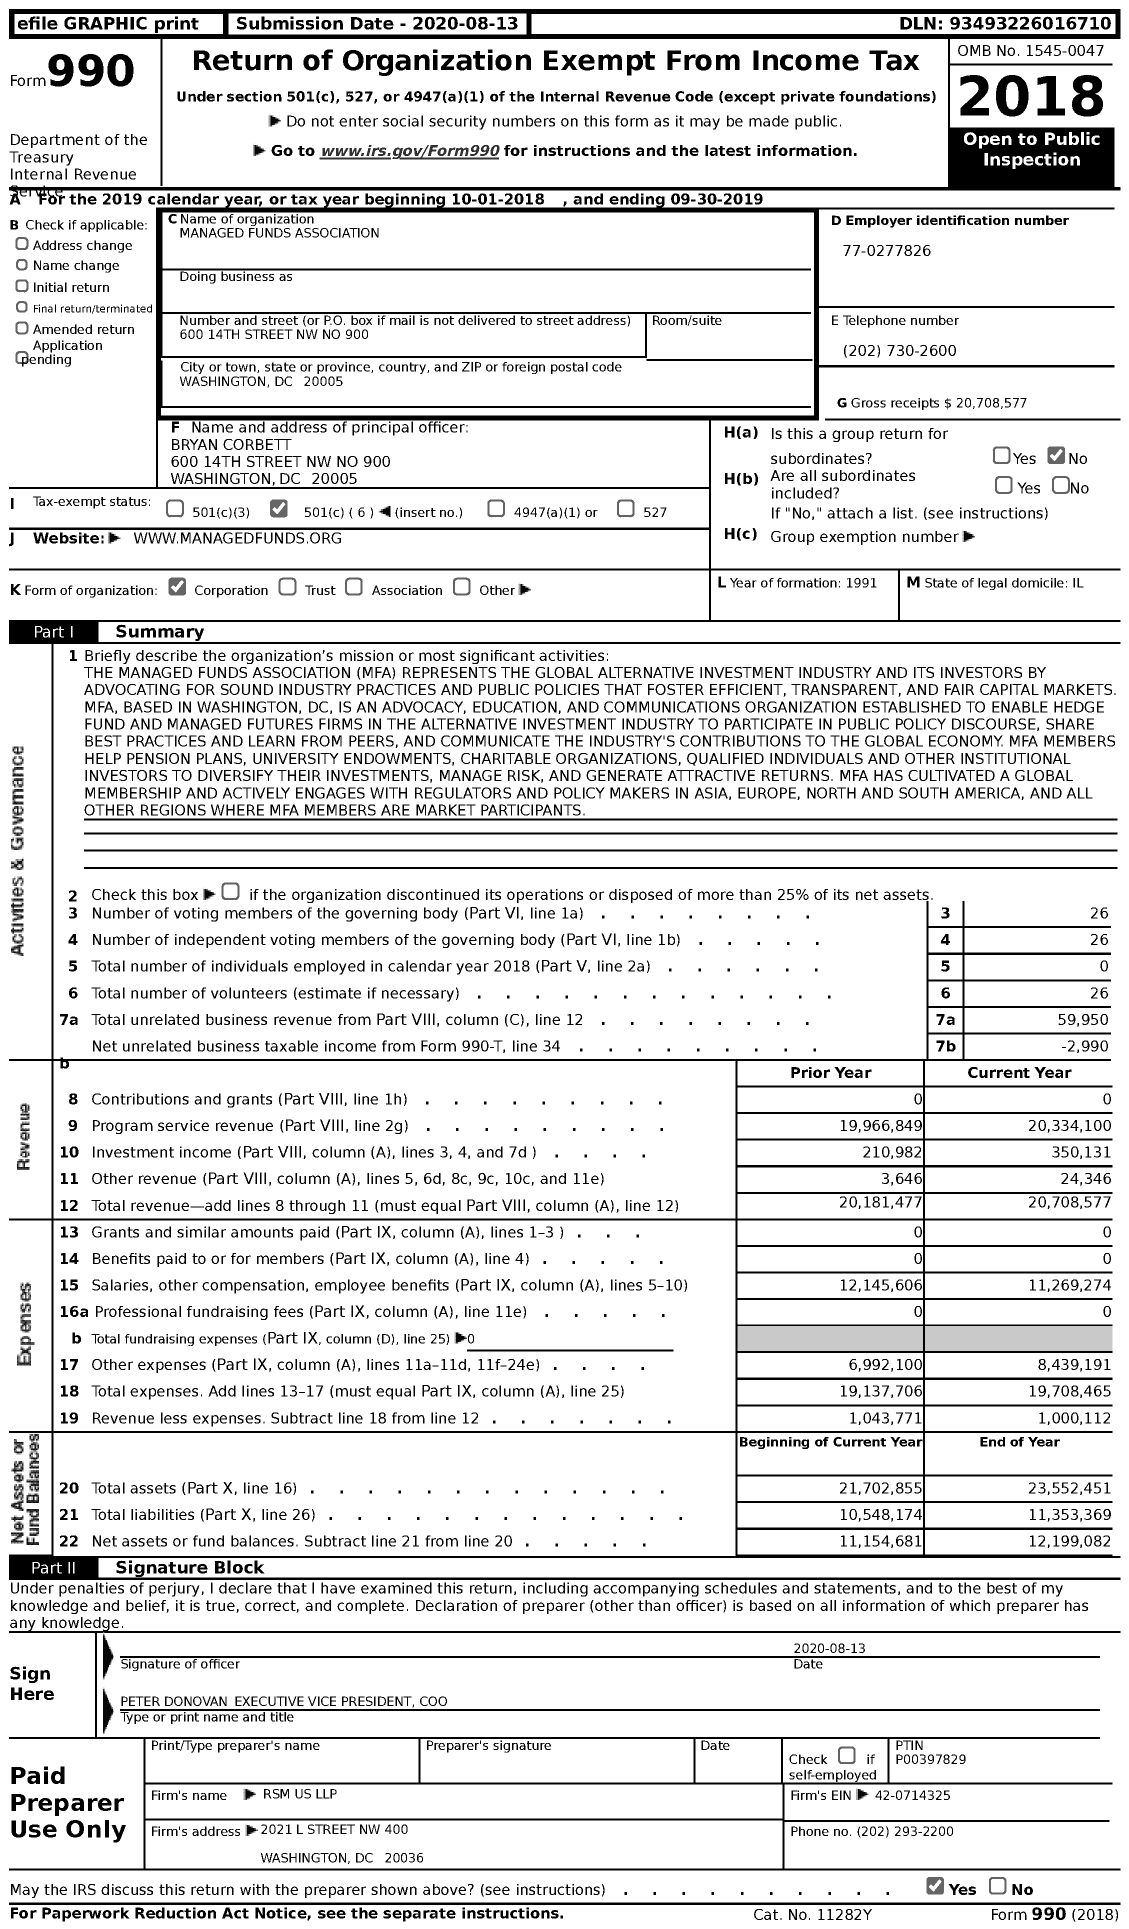 Image of first page of 2018 Form 990 for Managed Funds Association (MFA)